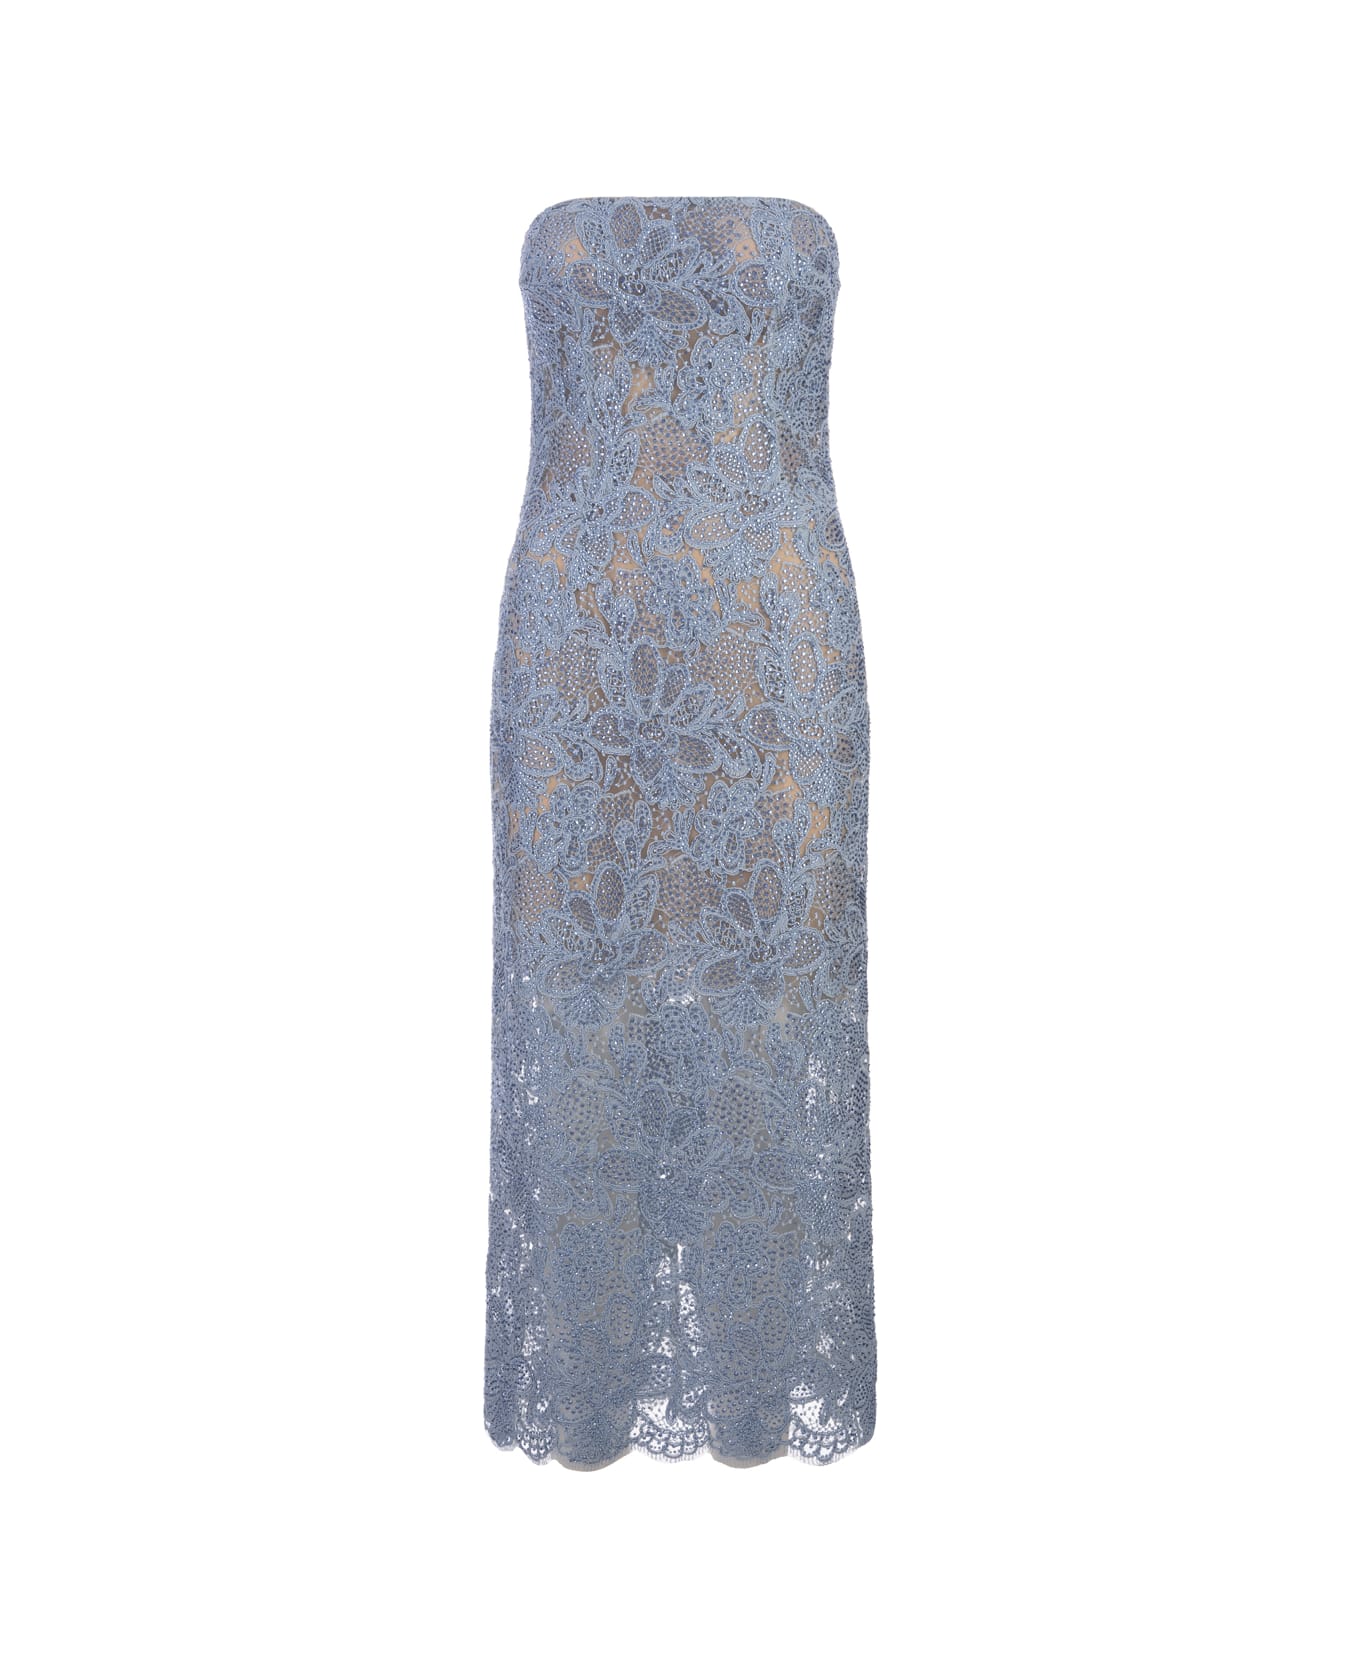 Ermanno Scervino Midi Dress In Light Blue Lace With Crystals - Blue